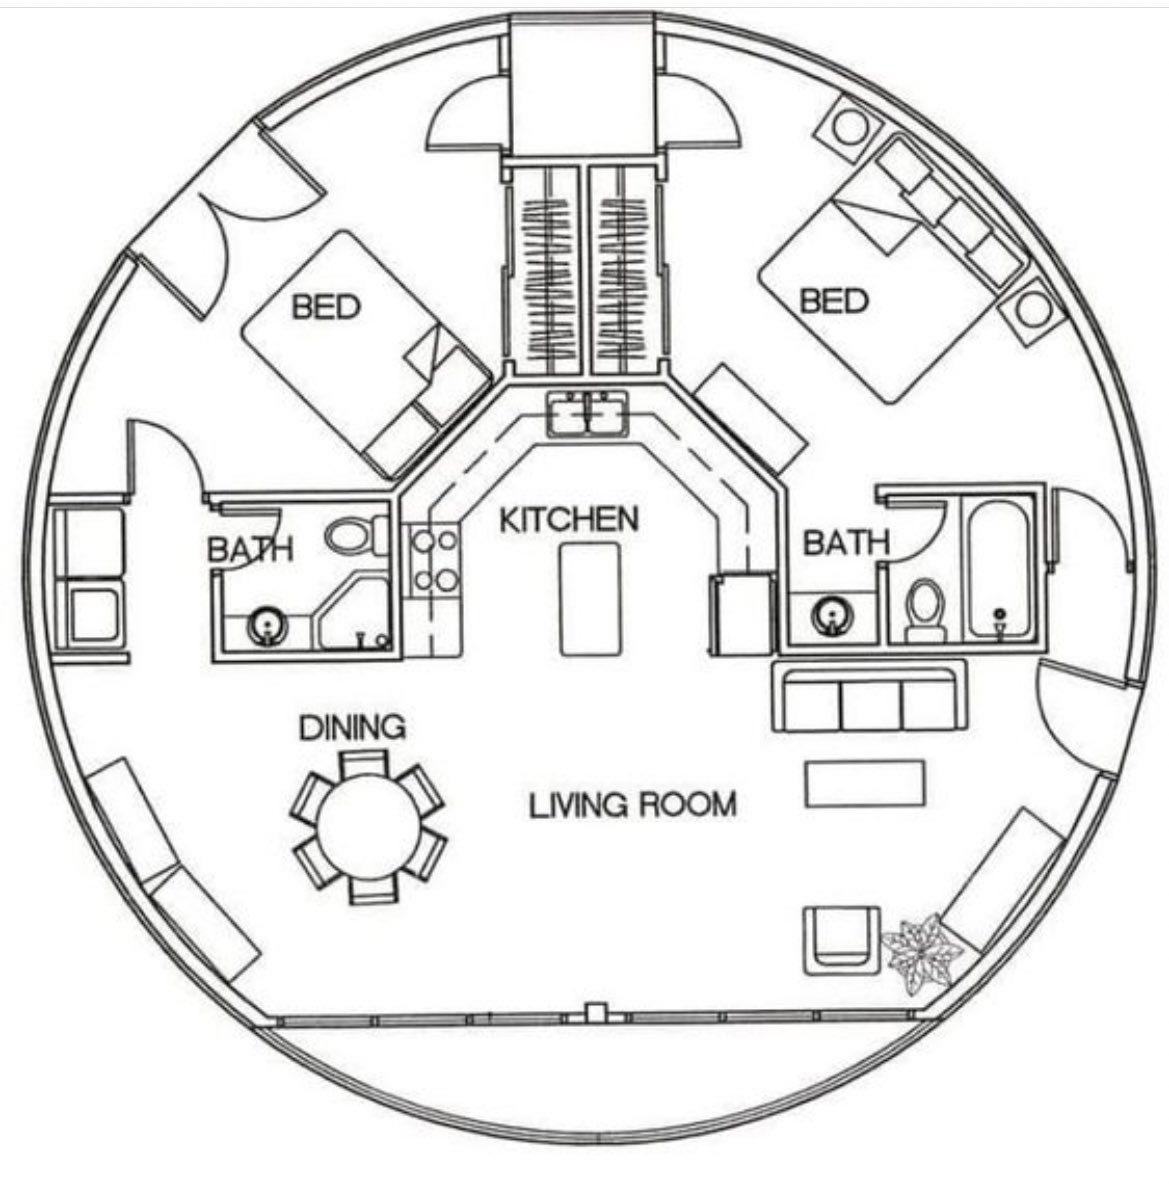 this is actually the floorplan hope this helps /j